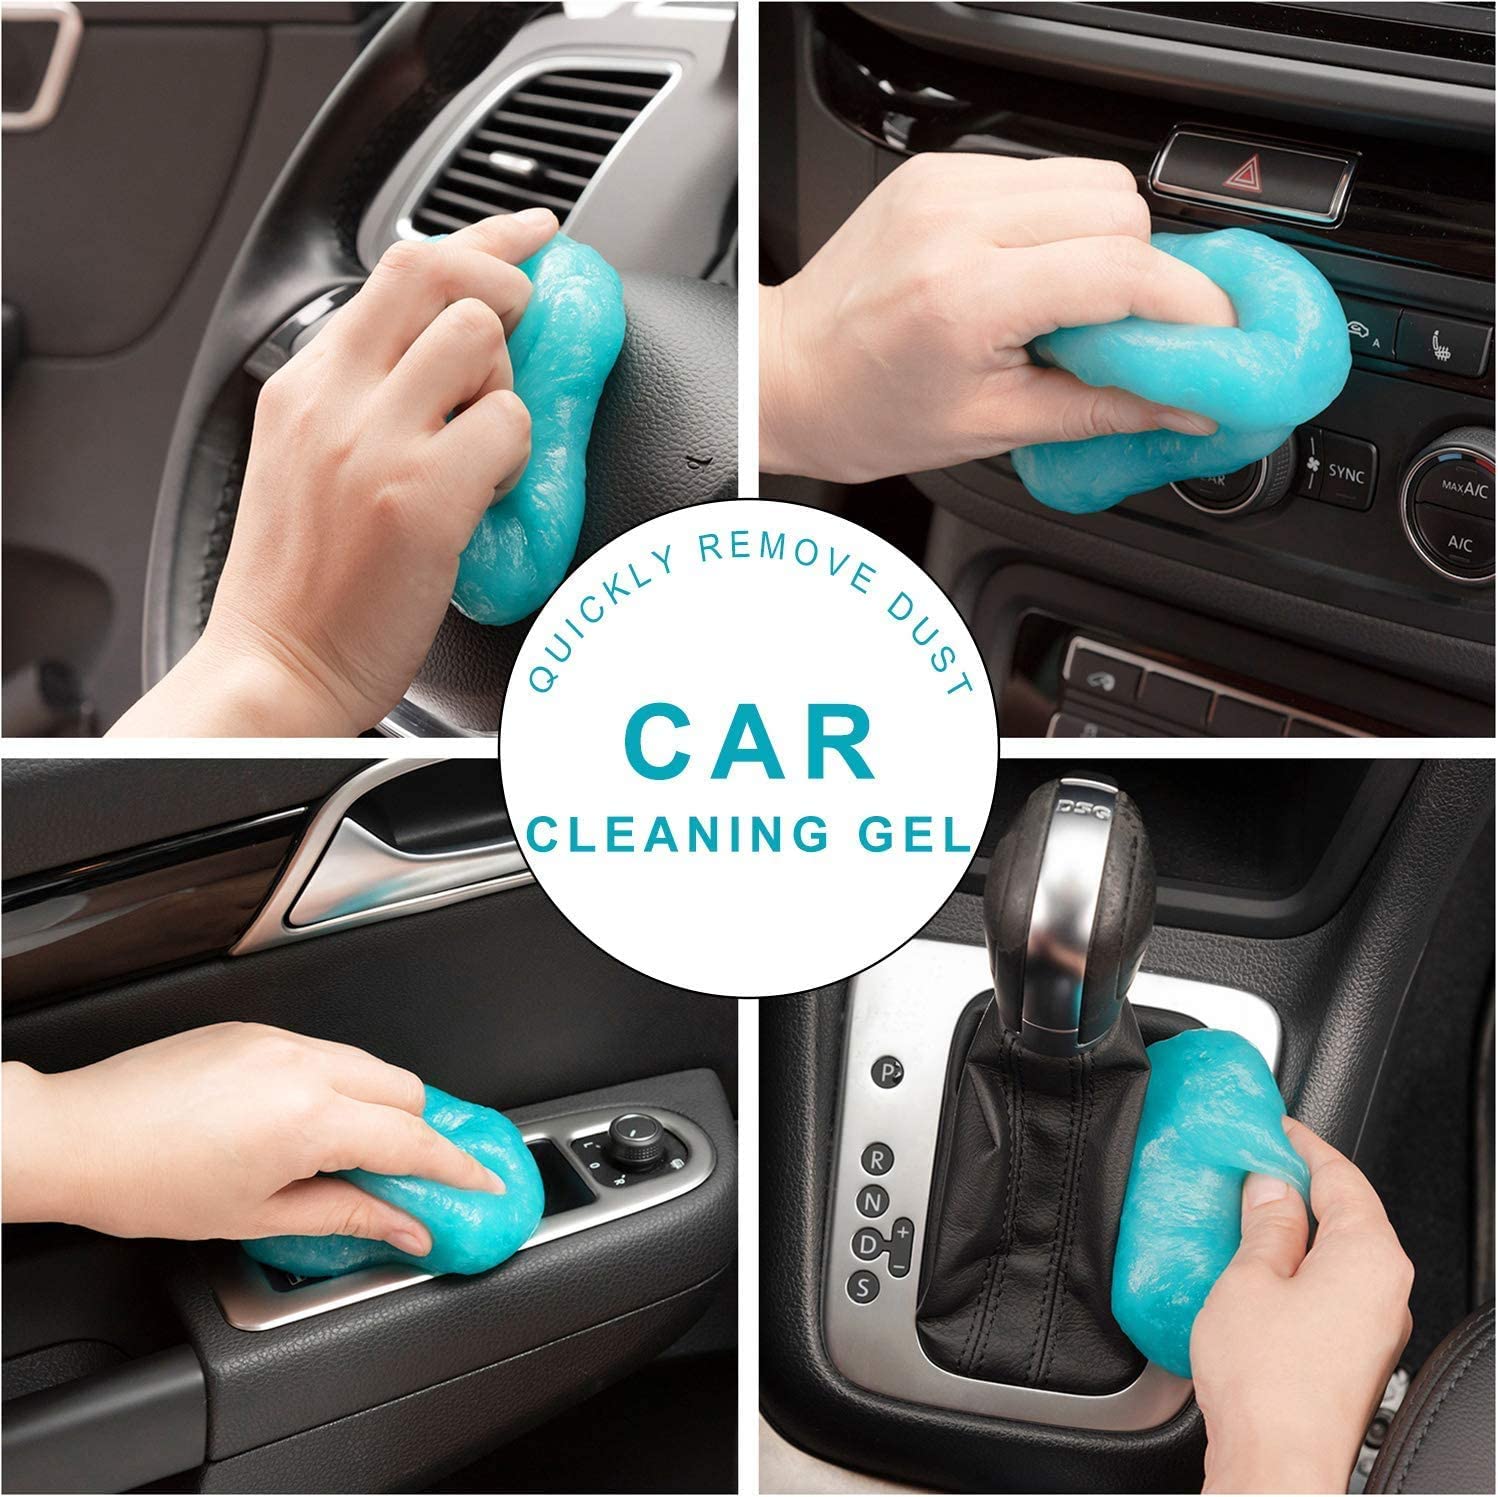  TICARVE Car Cleaning Gel Car Cleaning Putty Car Slime for  Cleaning Car Detailing Putty Detail Tools Car Interior Cleaner Automotive  Car Cleaning Kits Yellow Rose : Automotive